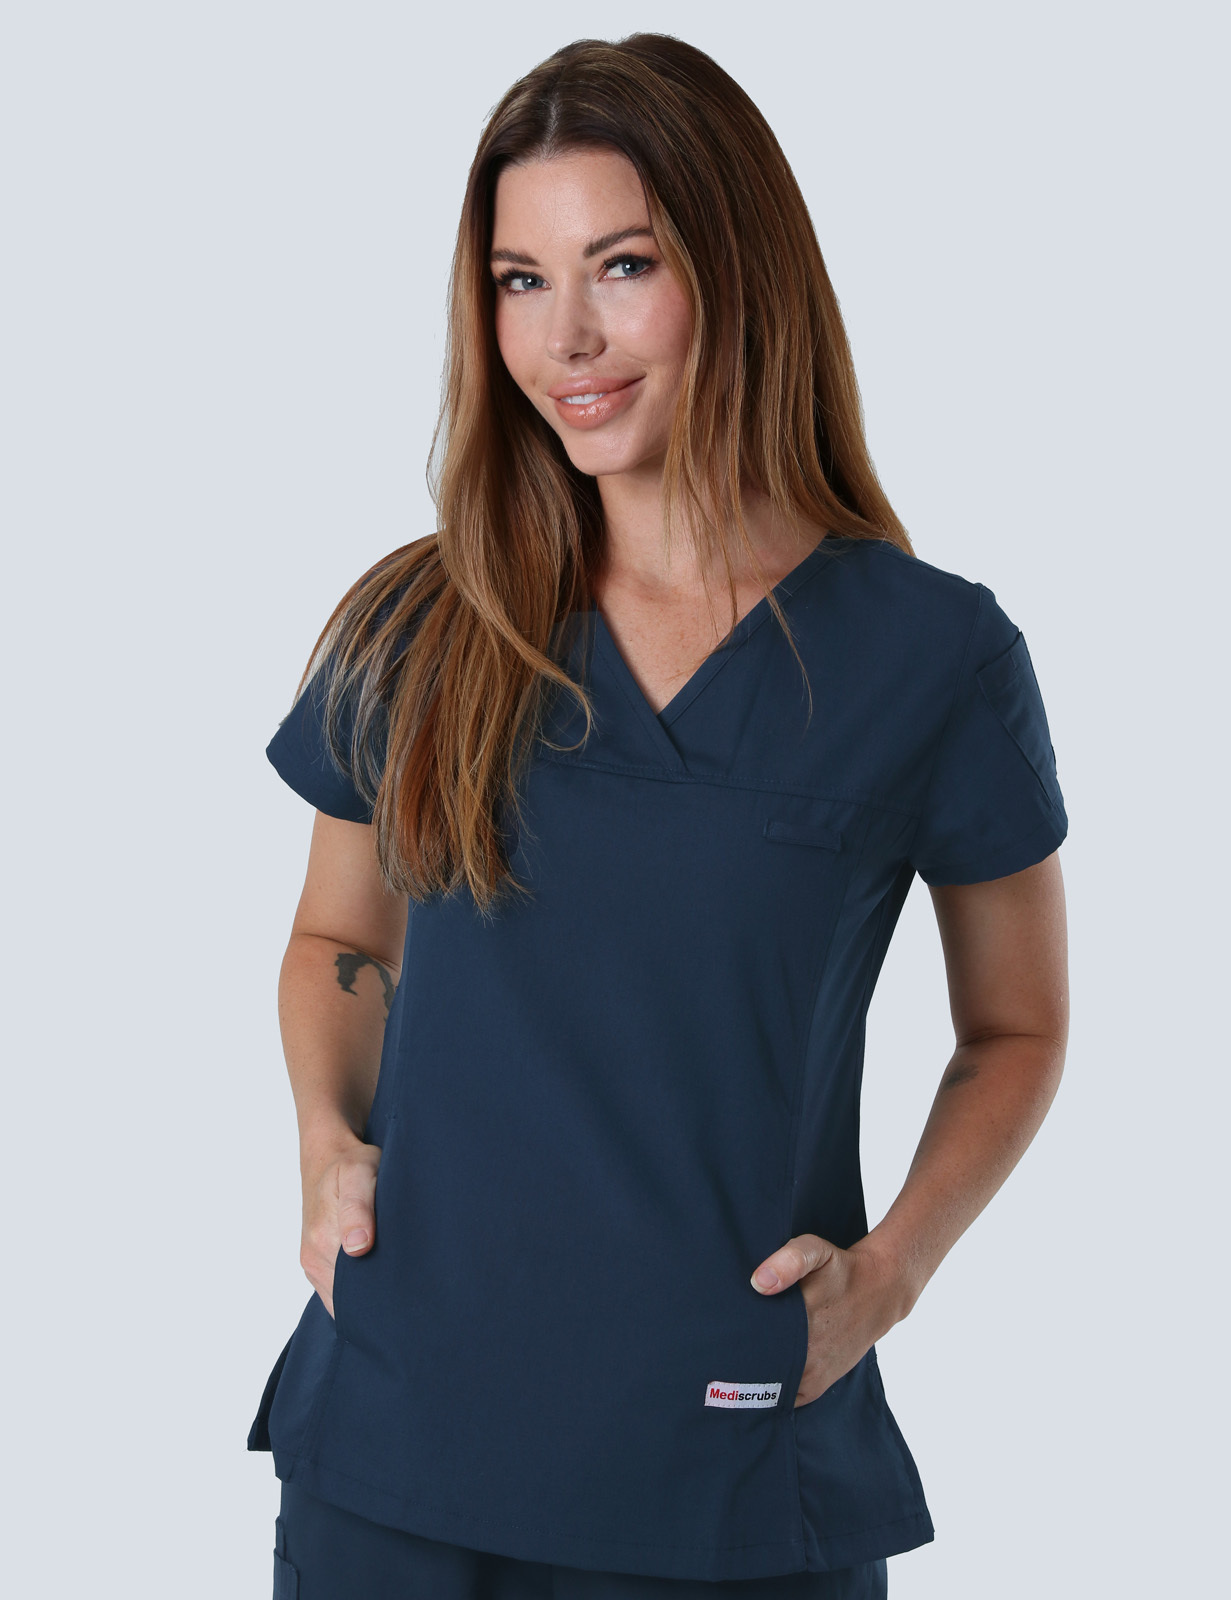 Toowoomba Hospital - ED RN (Women's Fit Solid Scrub Top and Cargo Pants in Navy incl Logo)